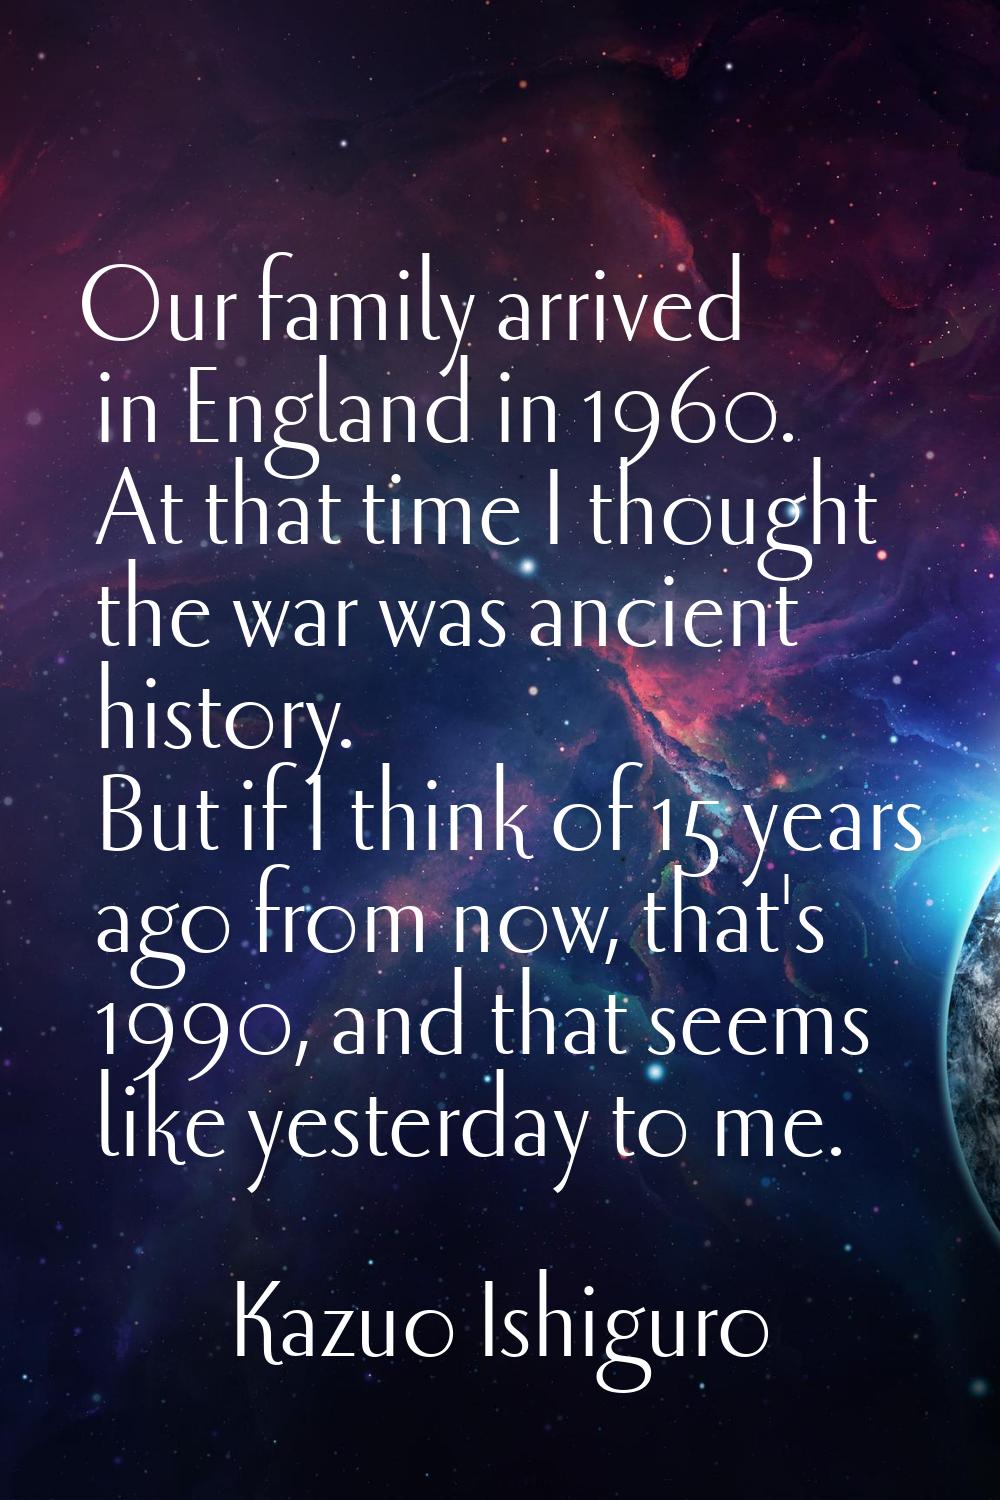 Our family arrived in England in 1960. At that time I thought the war was ancient history. But if I